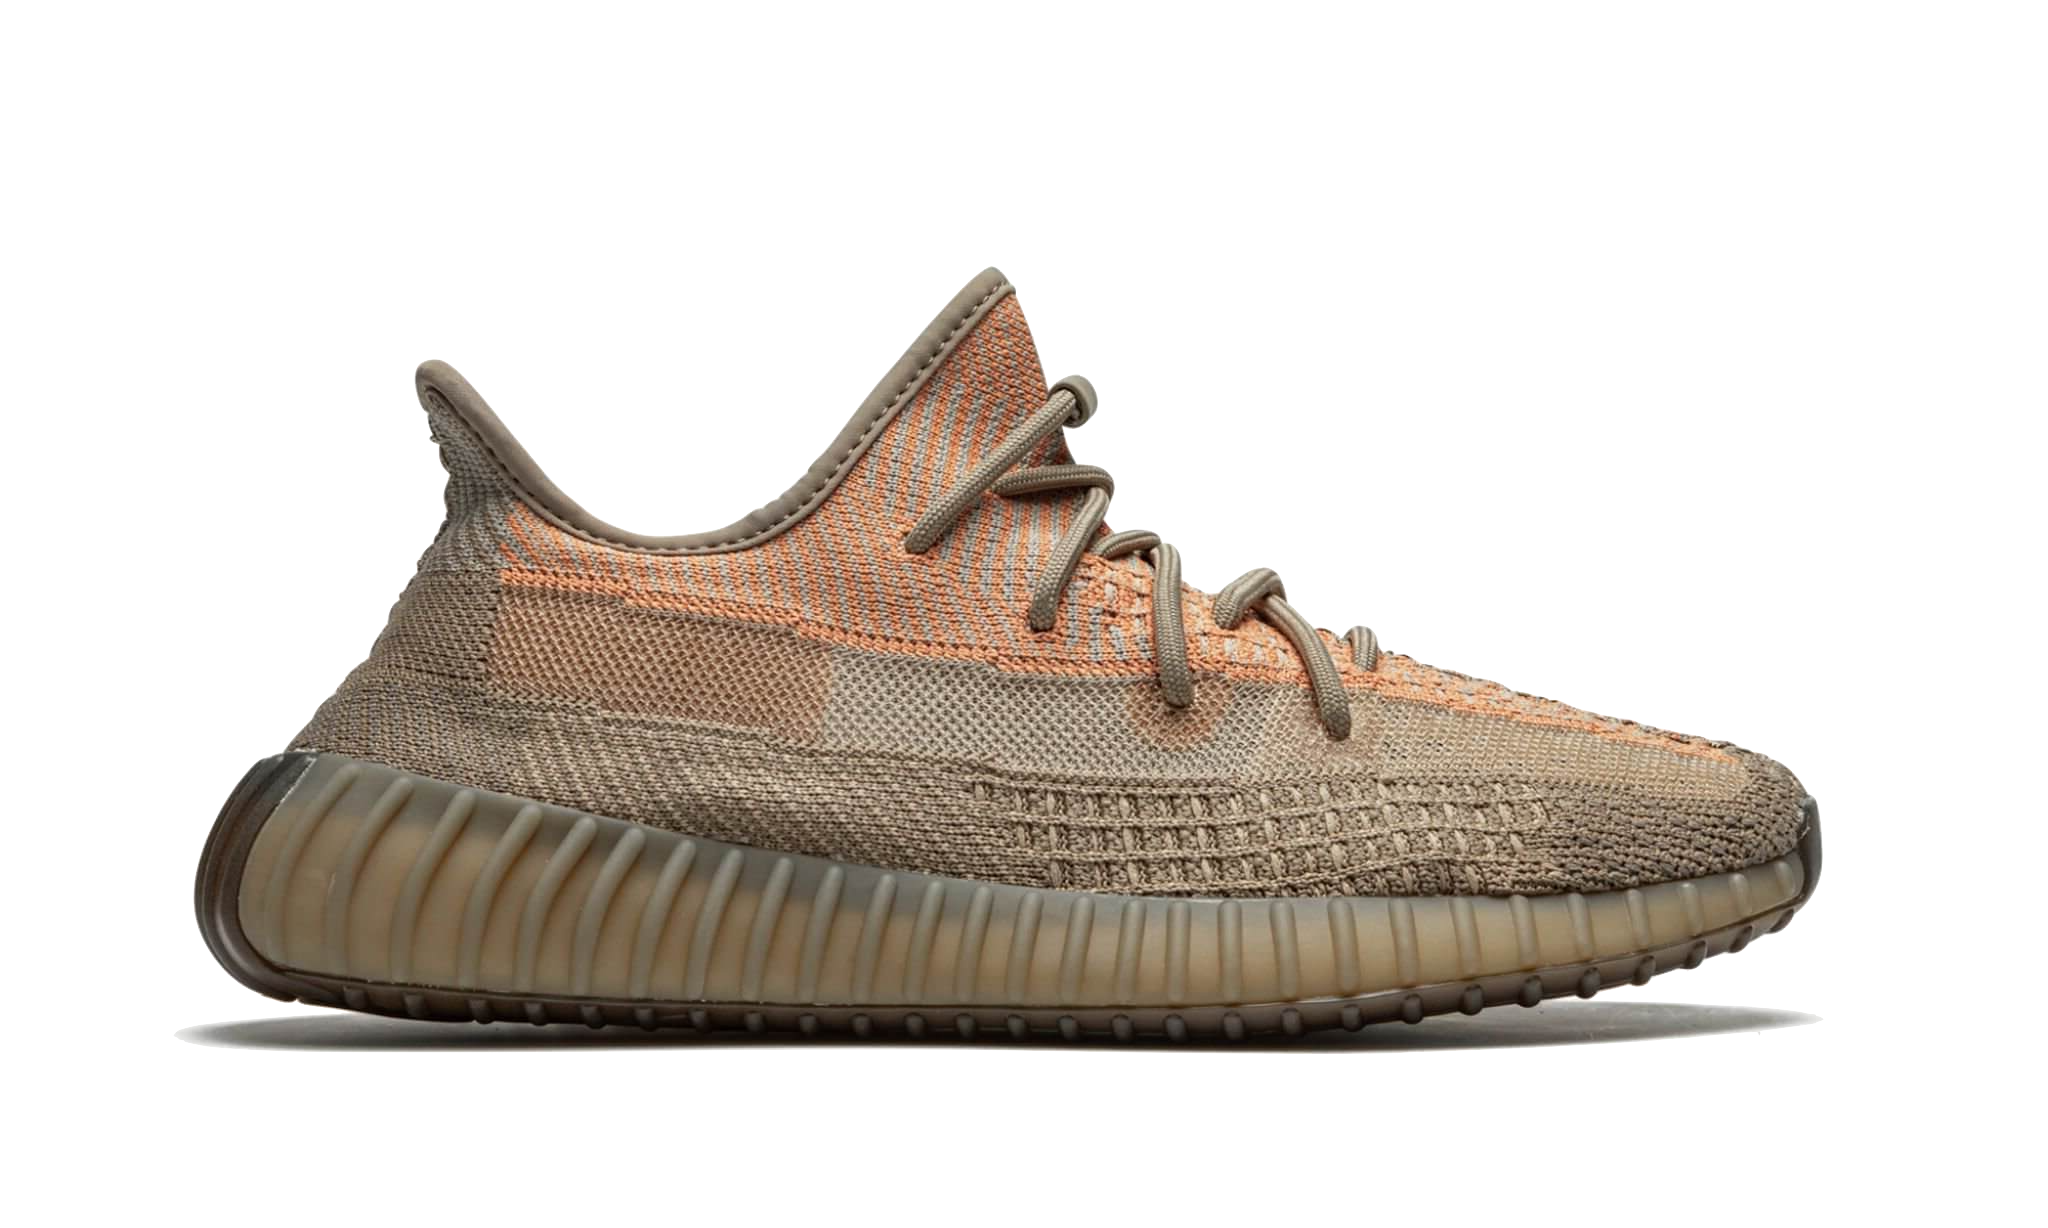 Adidas - Yeezy Boost 350 V2 Sand Taupe